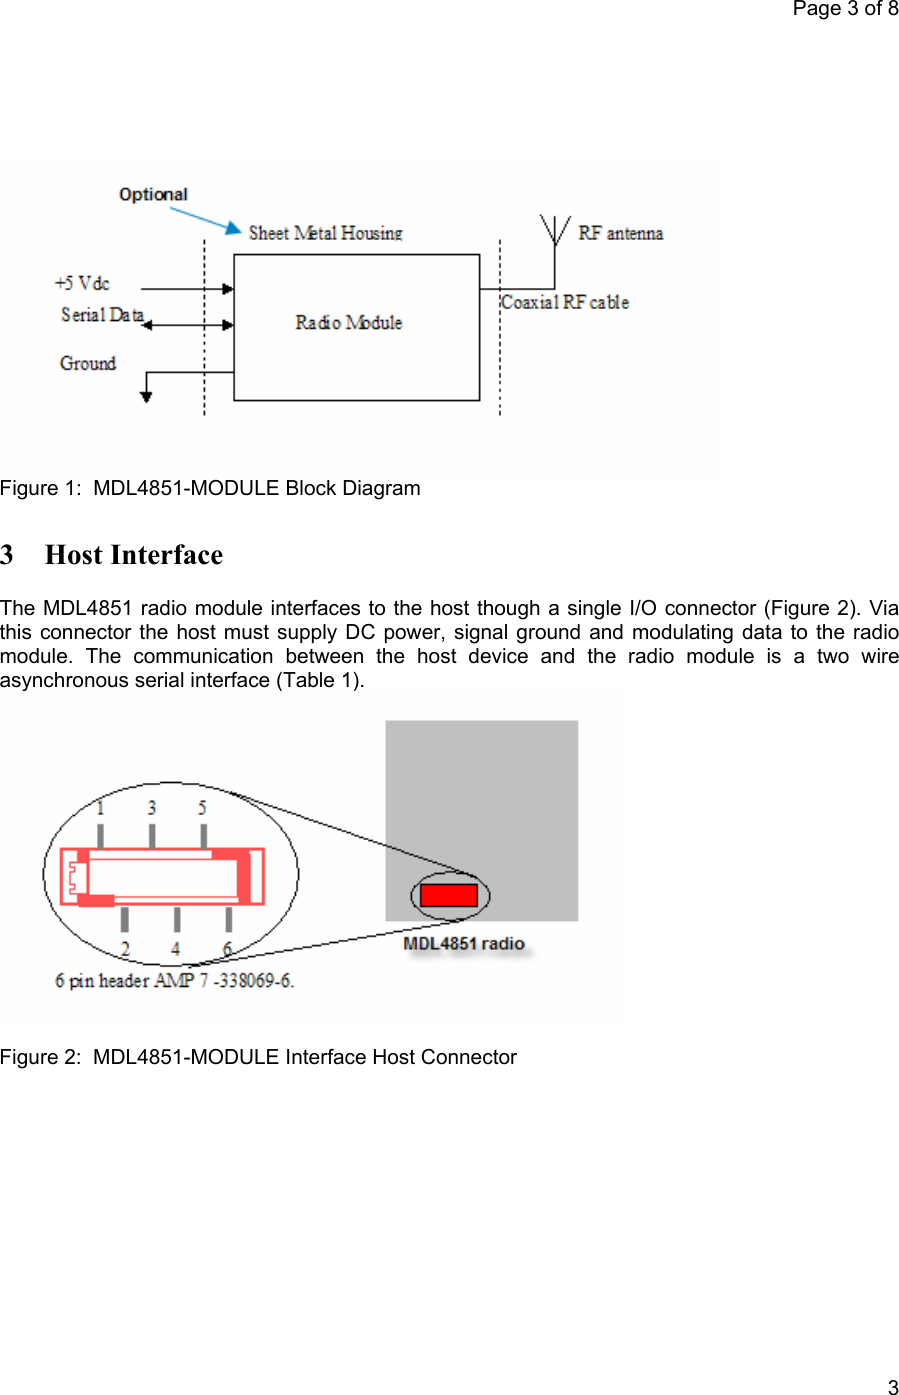 Page 3 of 8            3 Figure 1:  MDL4851-MODULE Block Diagram 3 Host Interface The MDL4851 radio module interfaces to the host though a single I/O connector (Figure 2). Via this connector the host must supply DC power, signal ground and modulating data to the radio module. The communication between the host device and the radio module is a two wire asynchronous serial interface (Table 1).   Figure 2:  MDL4851-MODULE Interface Host Connector 